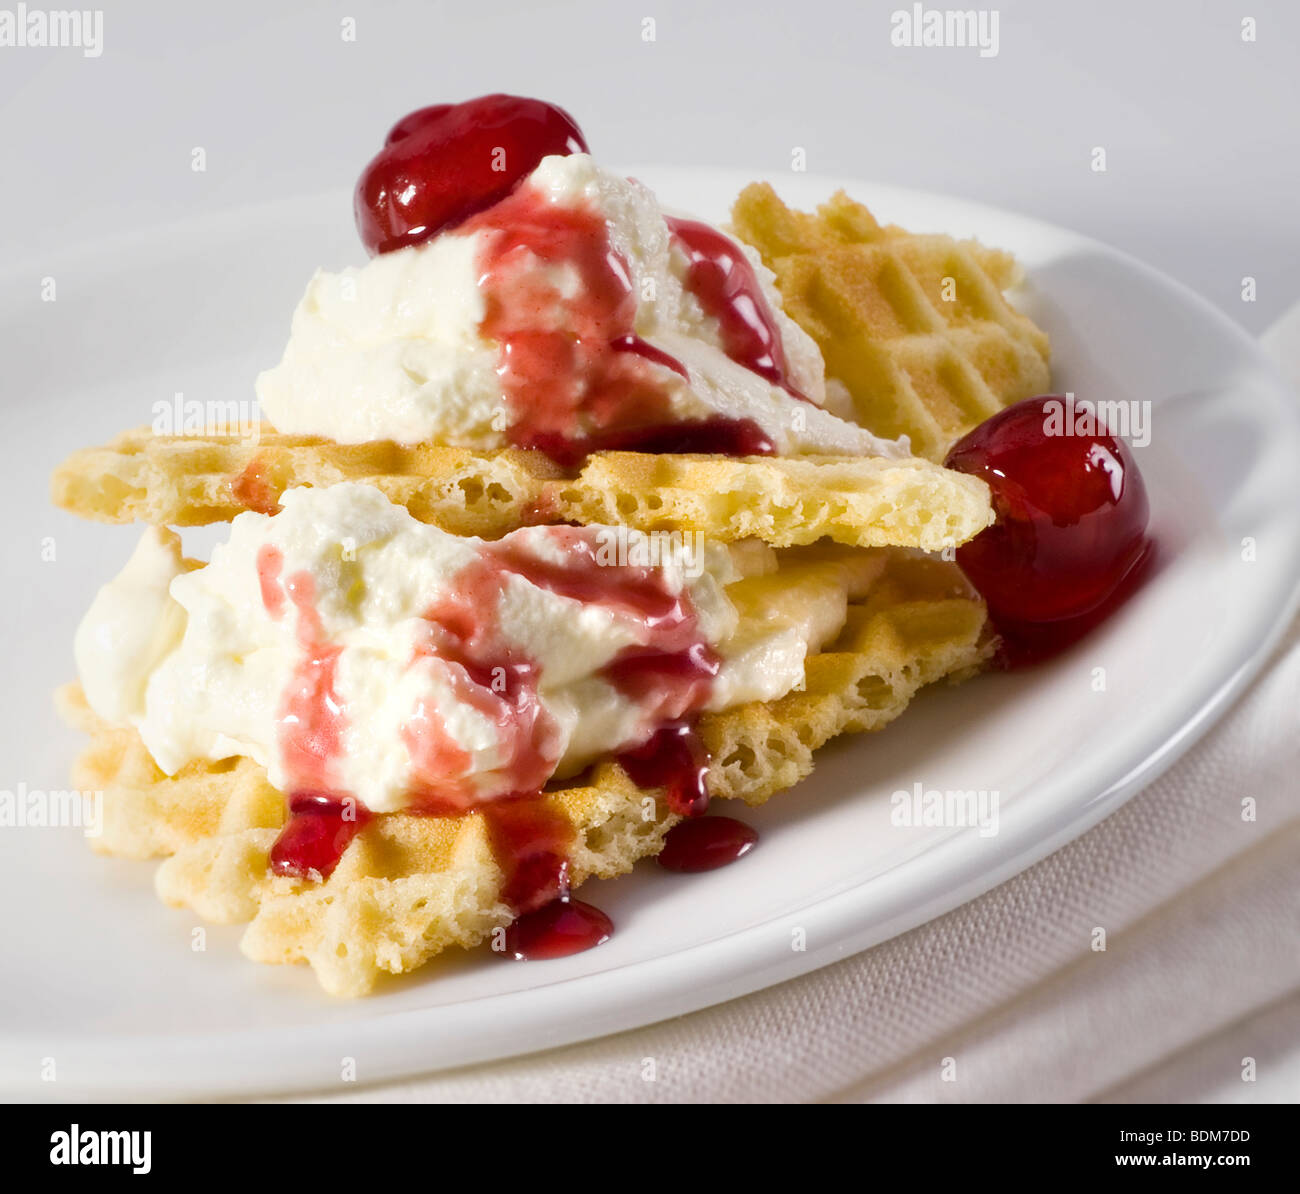 Wafer and whipped cream dessert Stock Photo